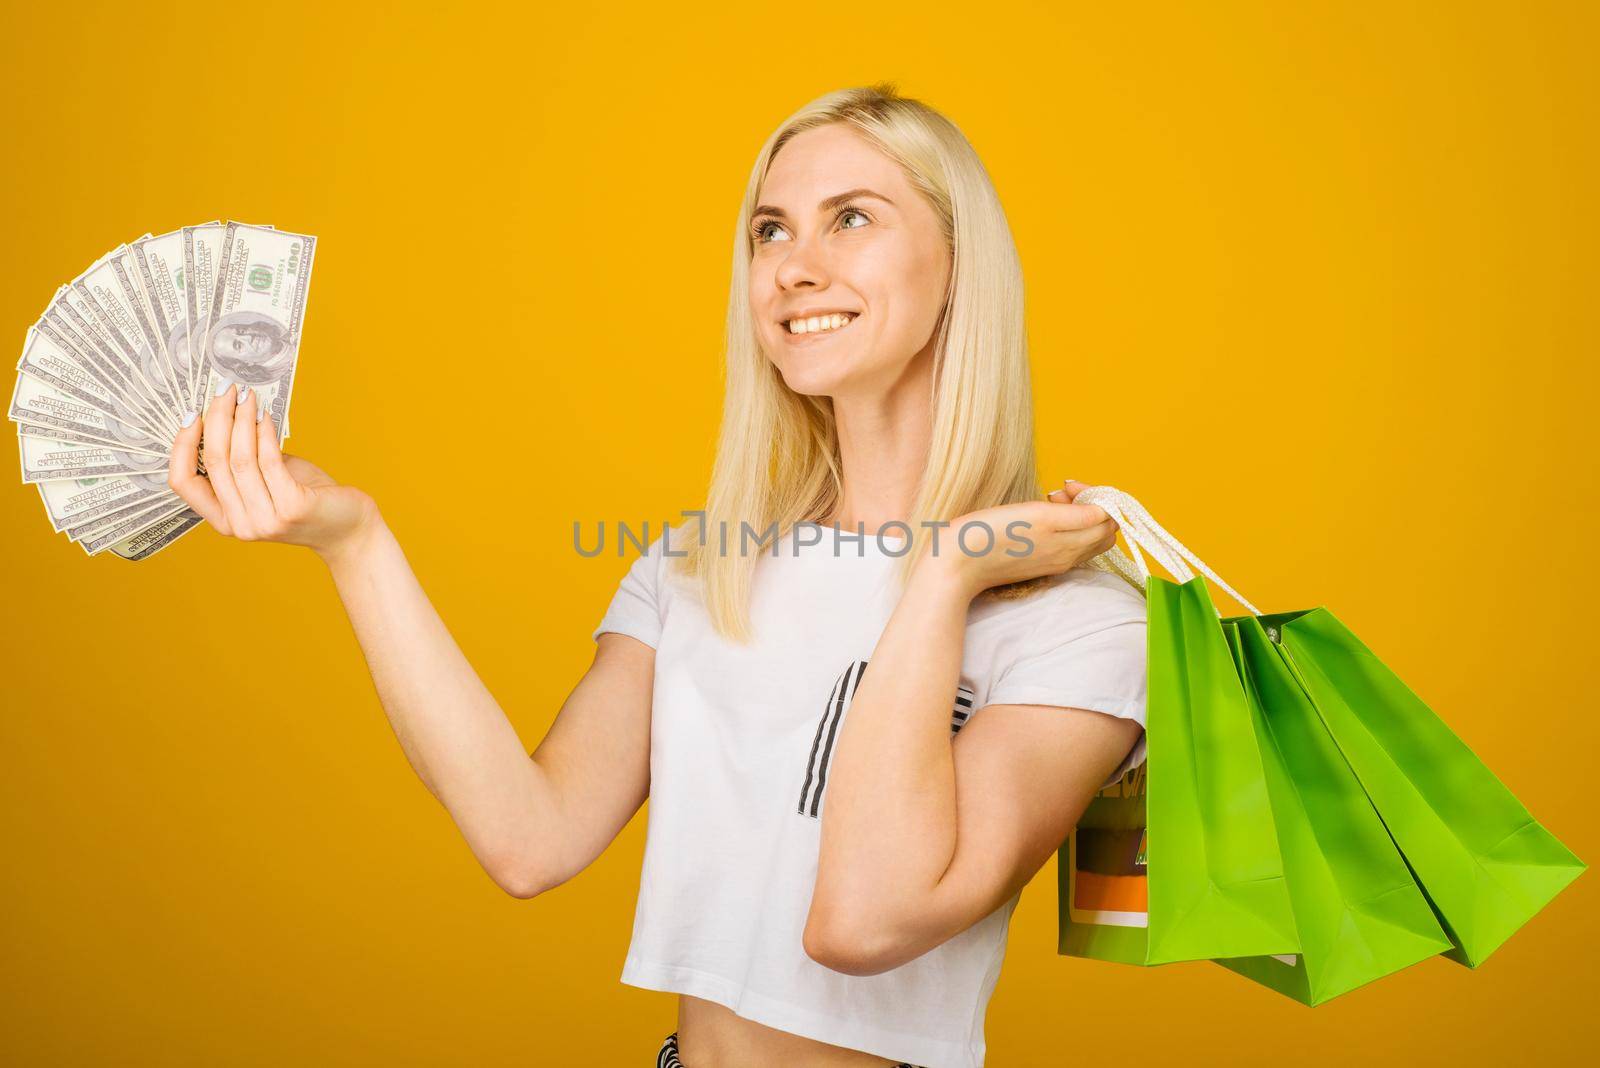 Close-up portrait of happy young beautiful blonde woman holding money and green shopping bags, isolated on yellow background - Image